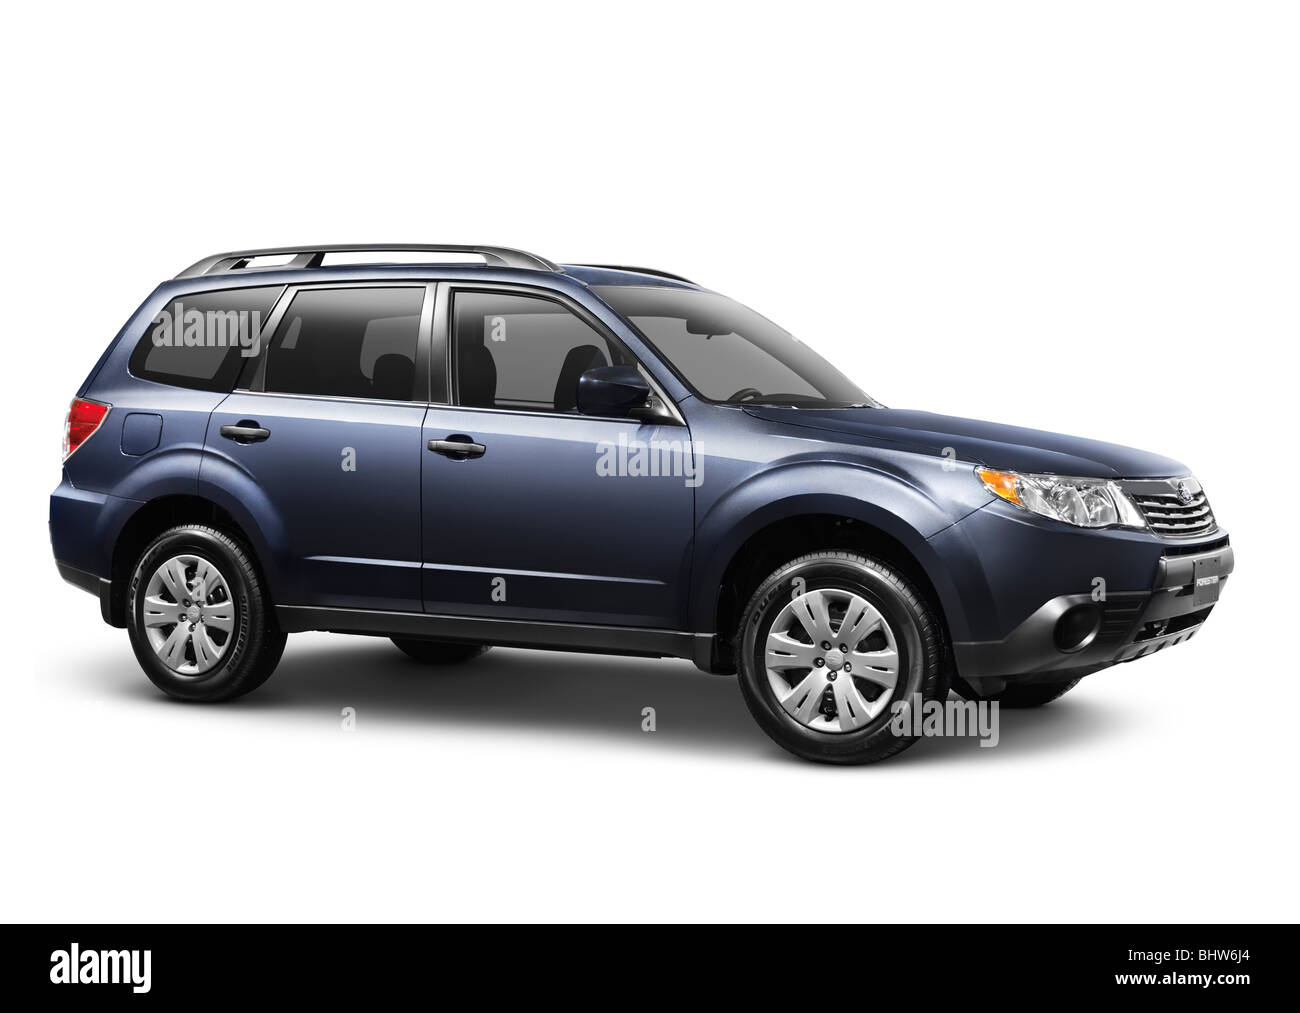 License available at MaximImages.com - 2010 Subaru Forester SUV isolated on white background with clipping path Stock Photo